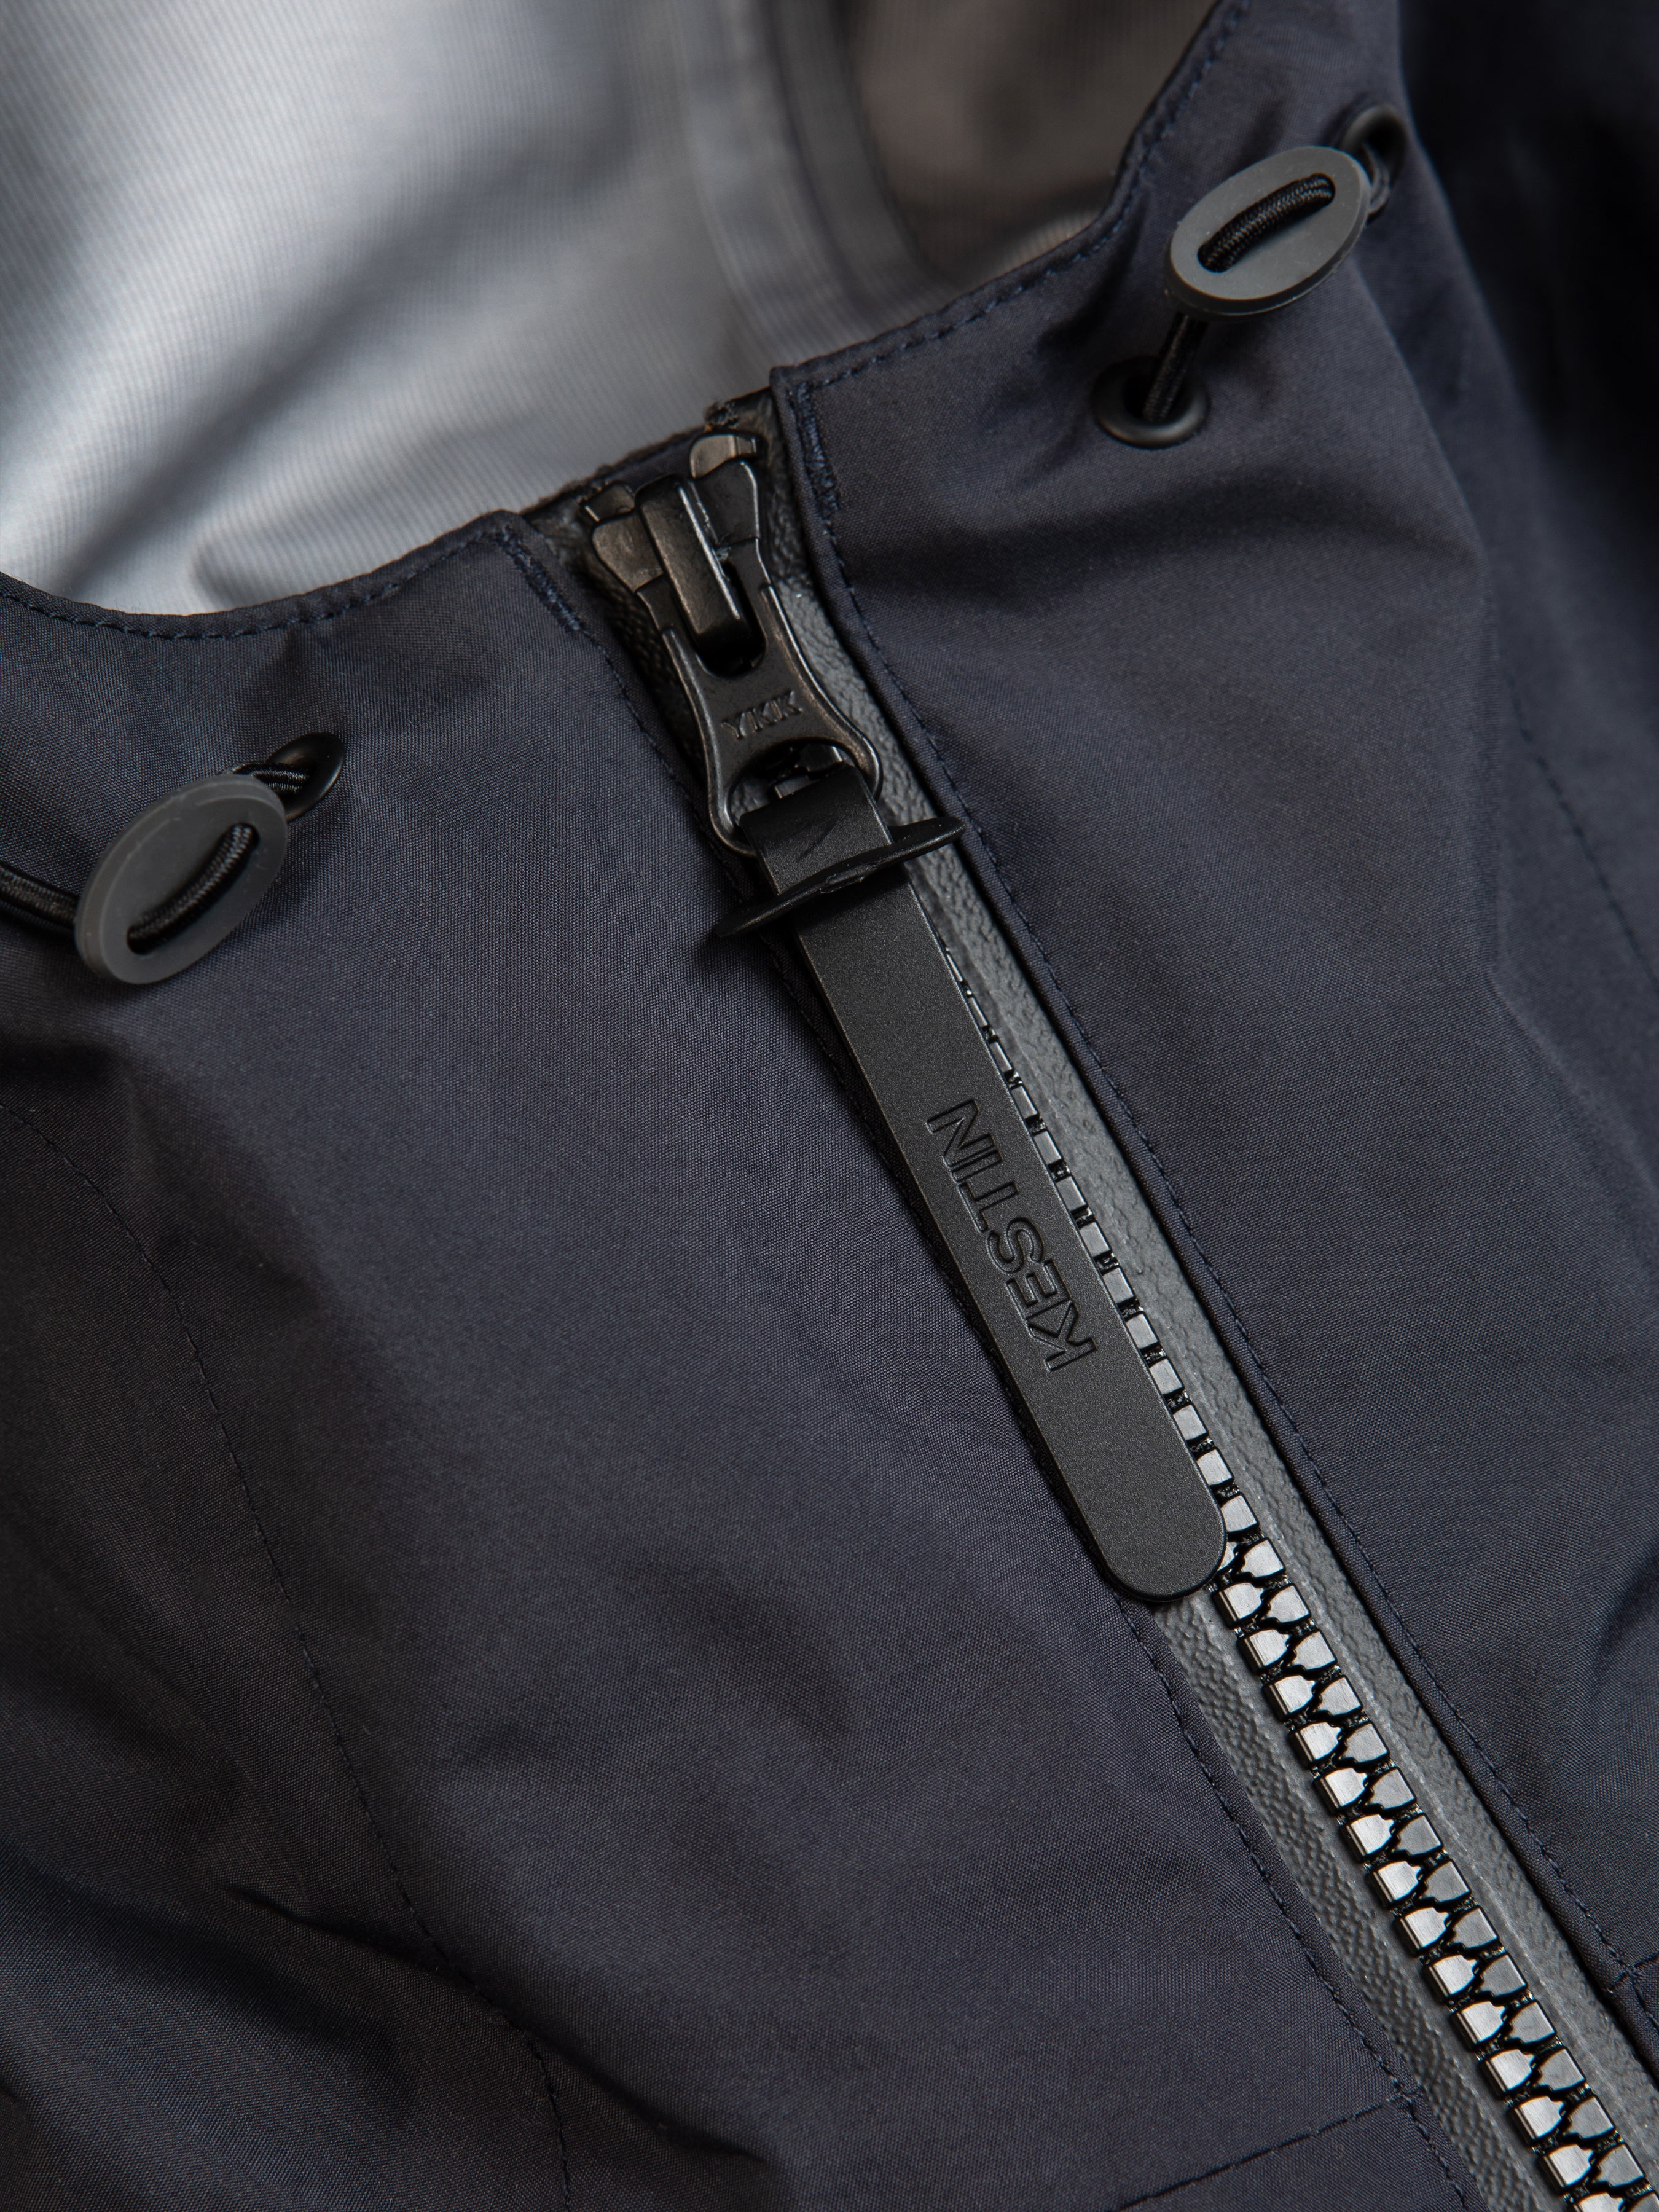 The zippered front and pull on a waterproof shell jacket in navy blue.